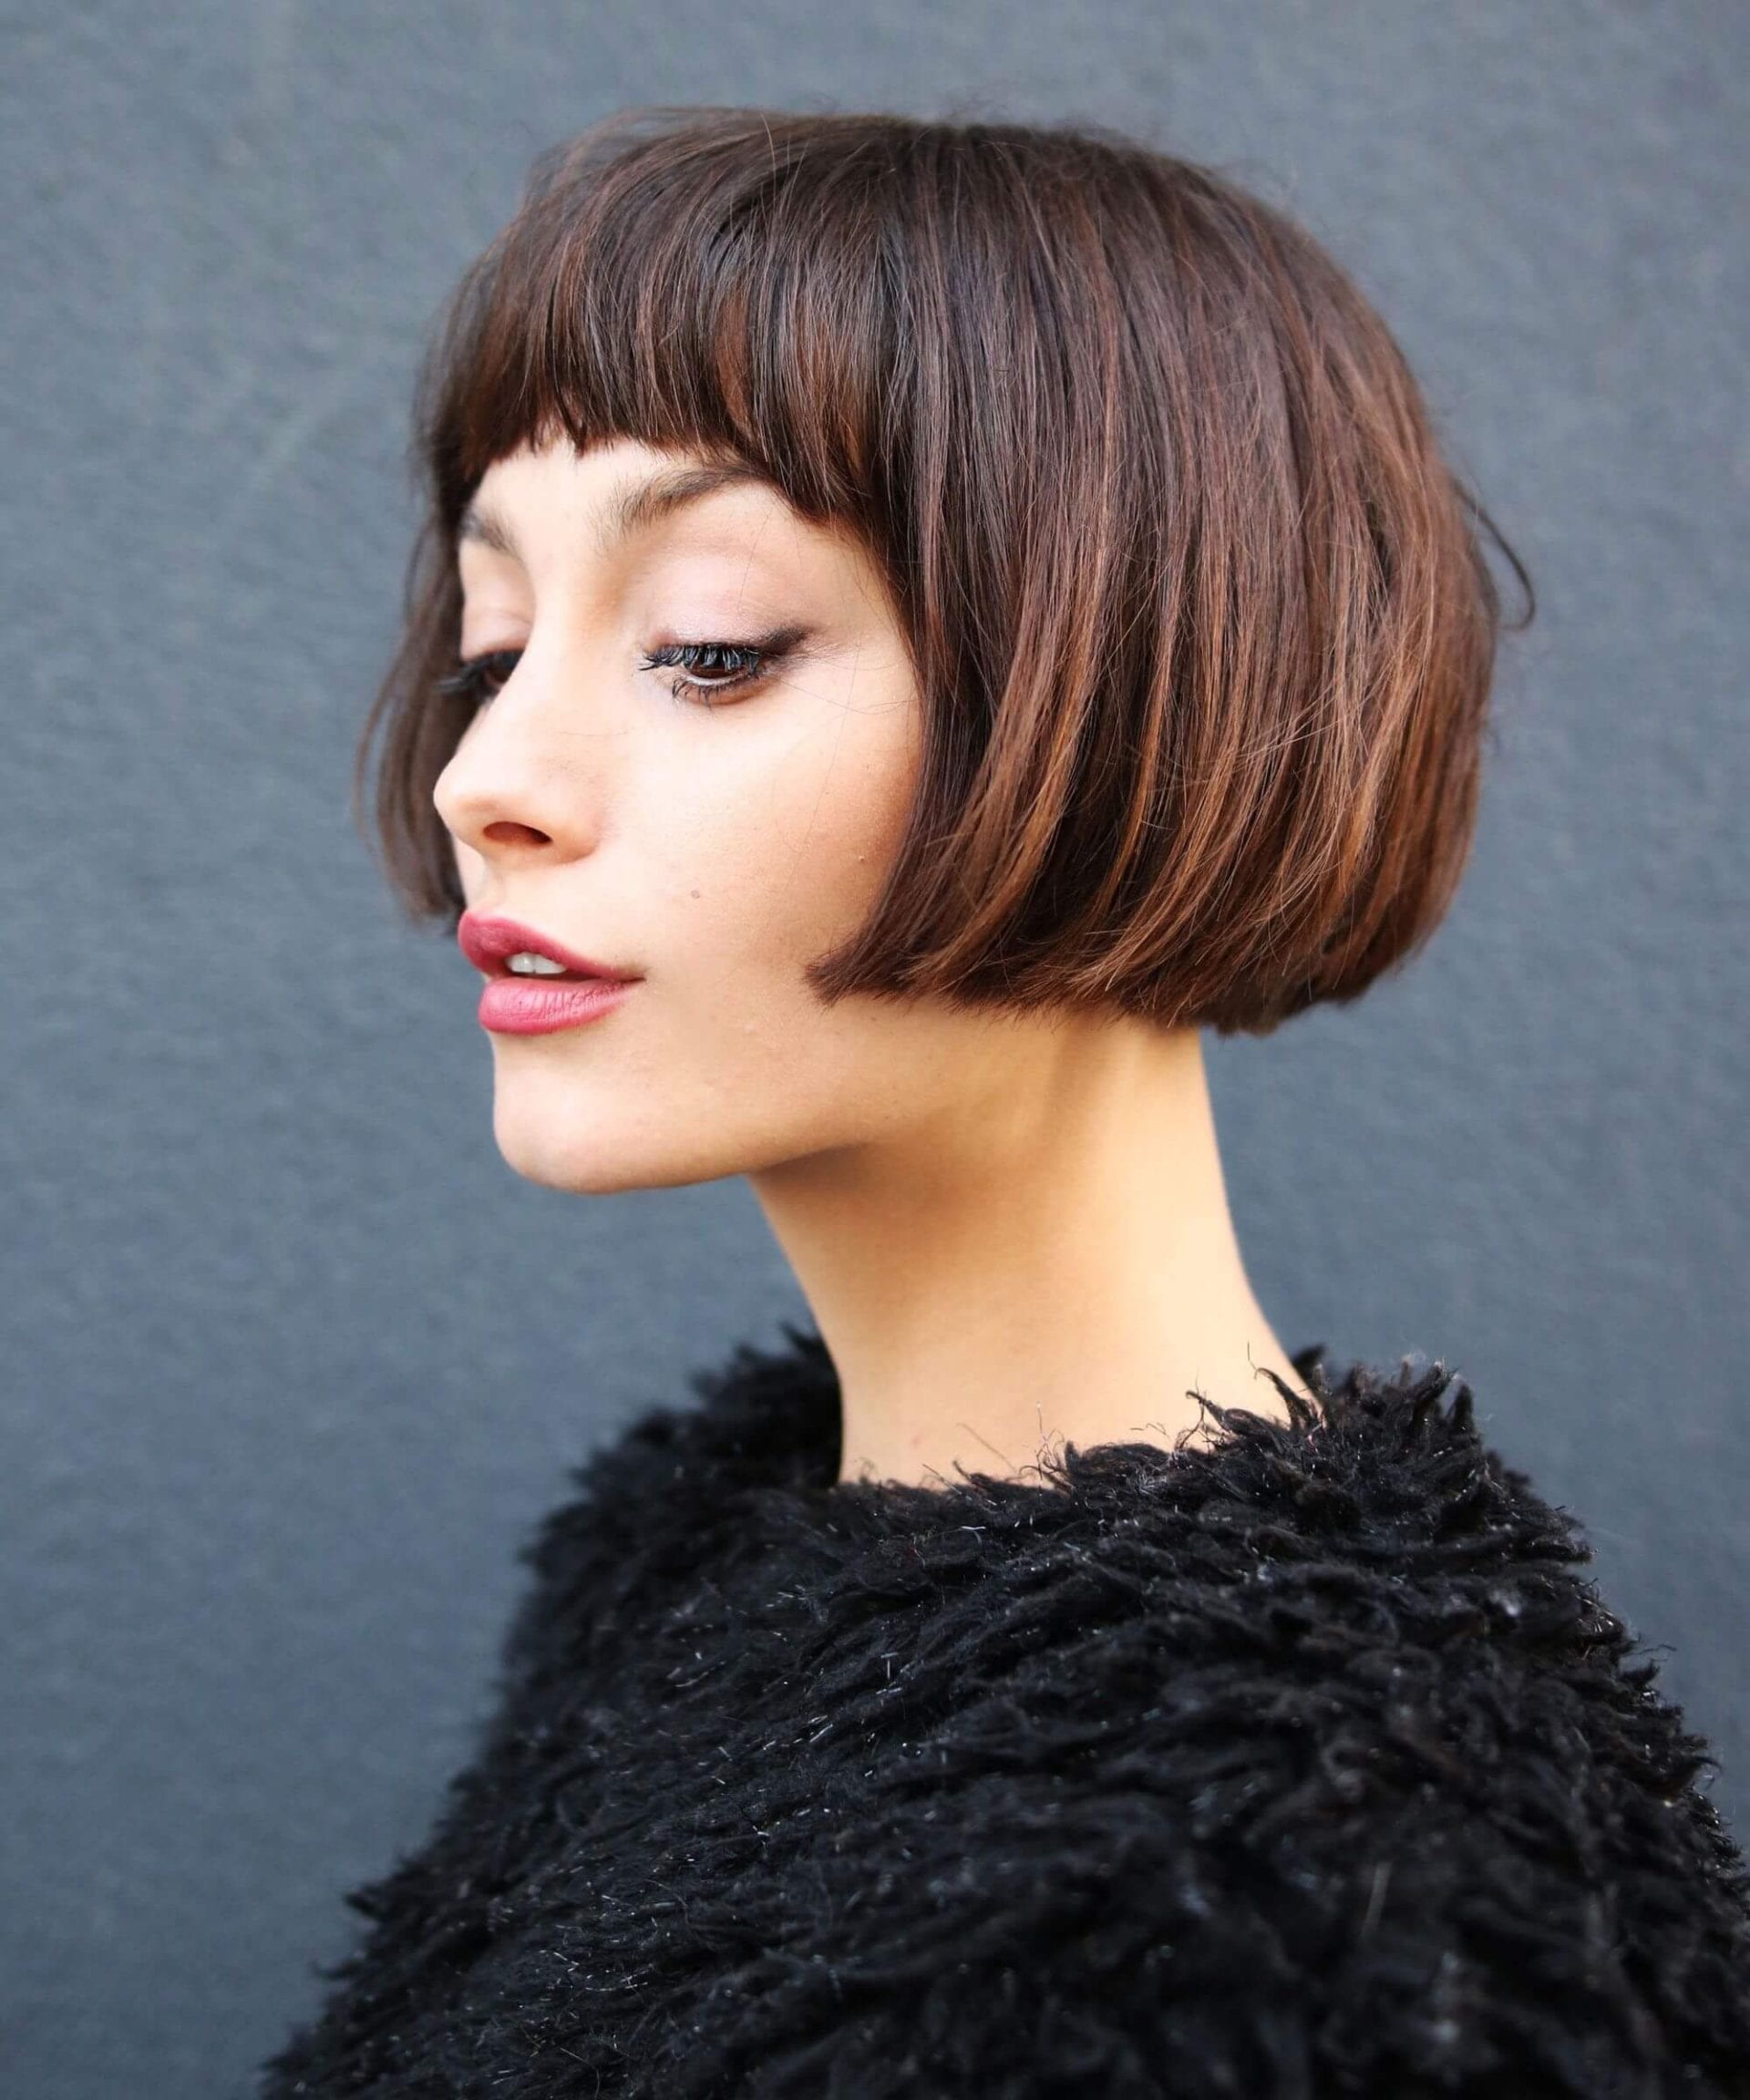 Classic Bob Haircuts - 25 Bob Hairstyles for an Awesome Look - Hottest